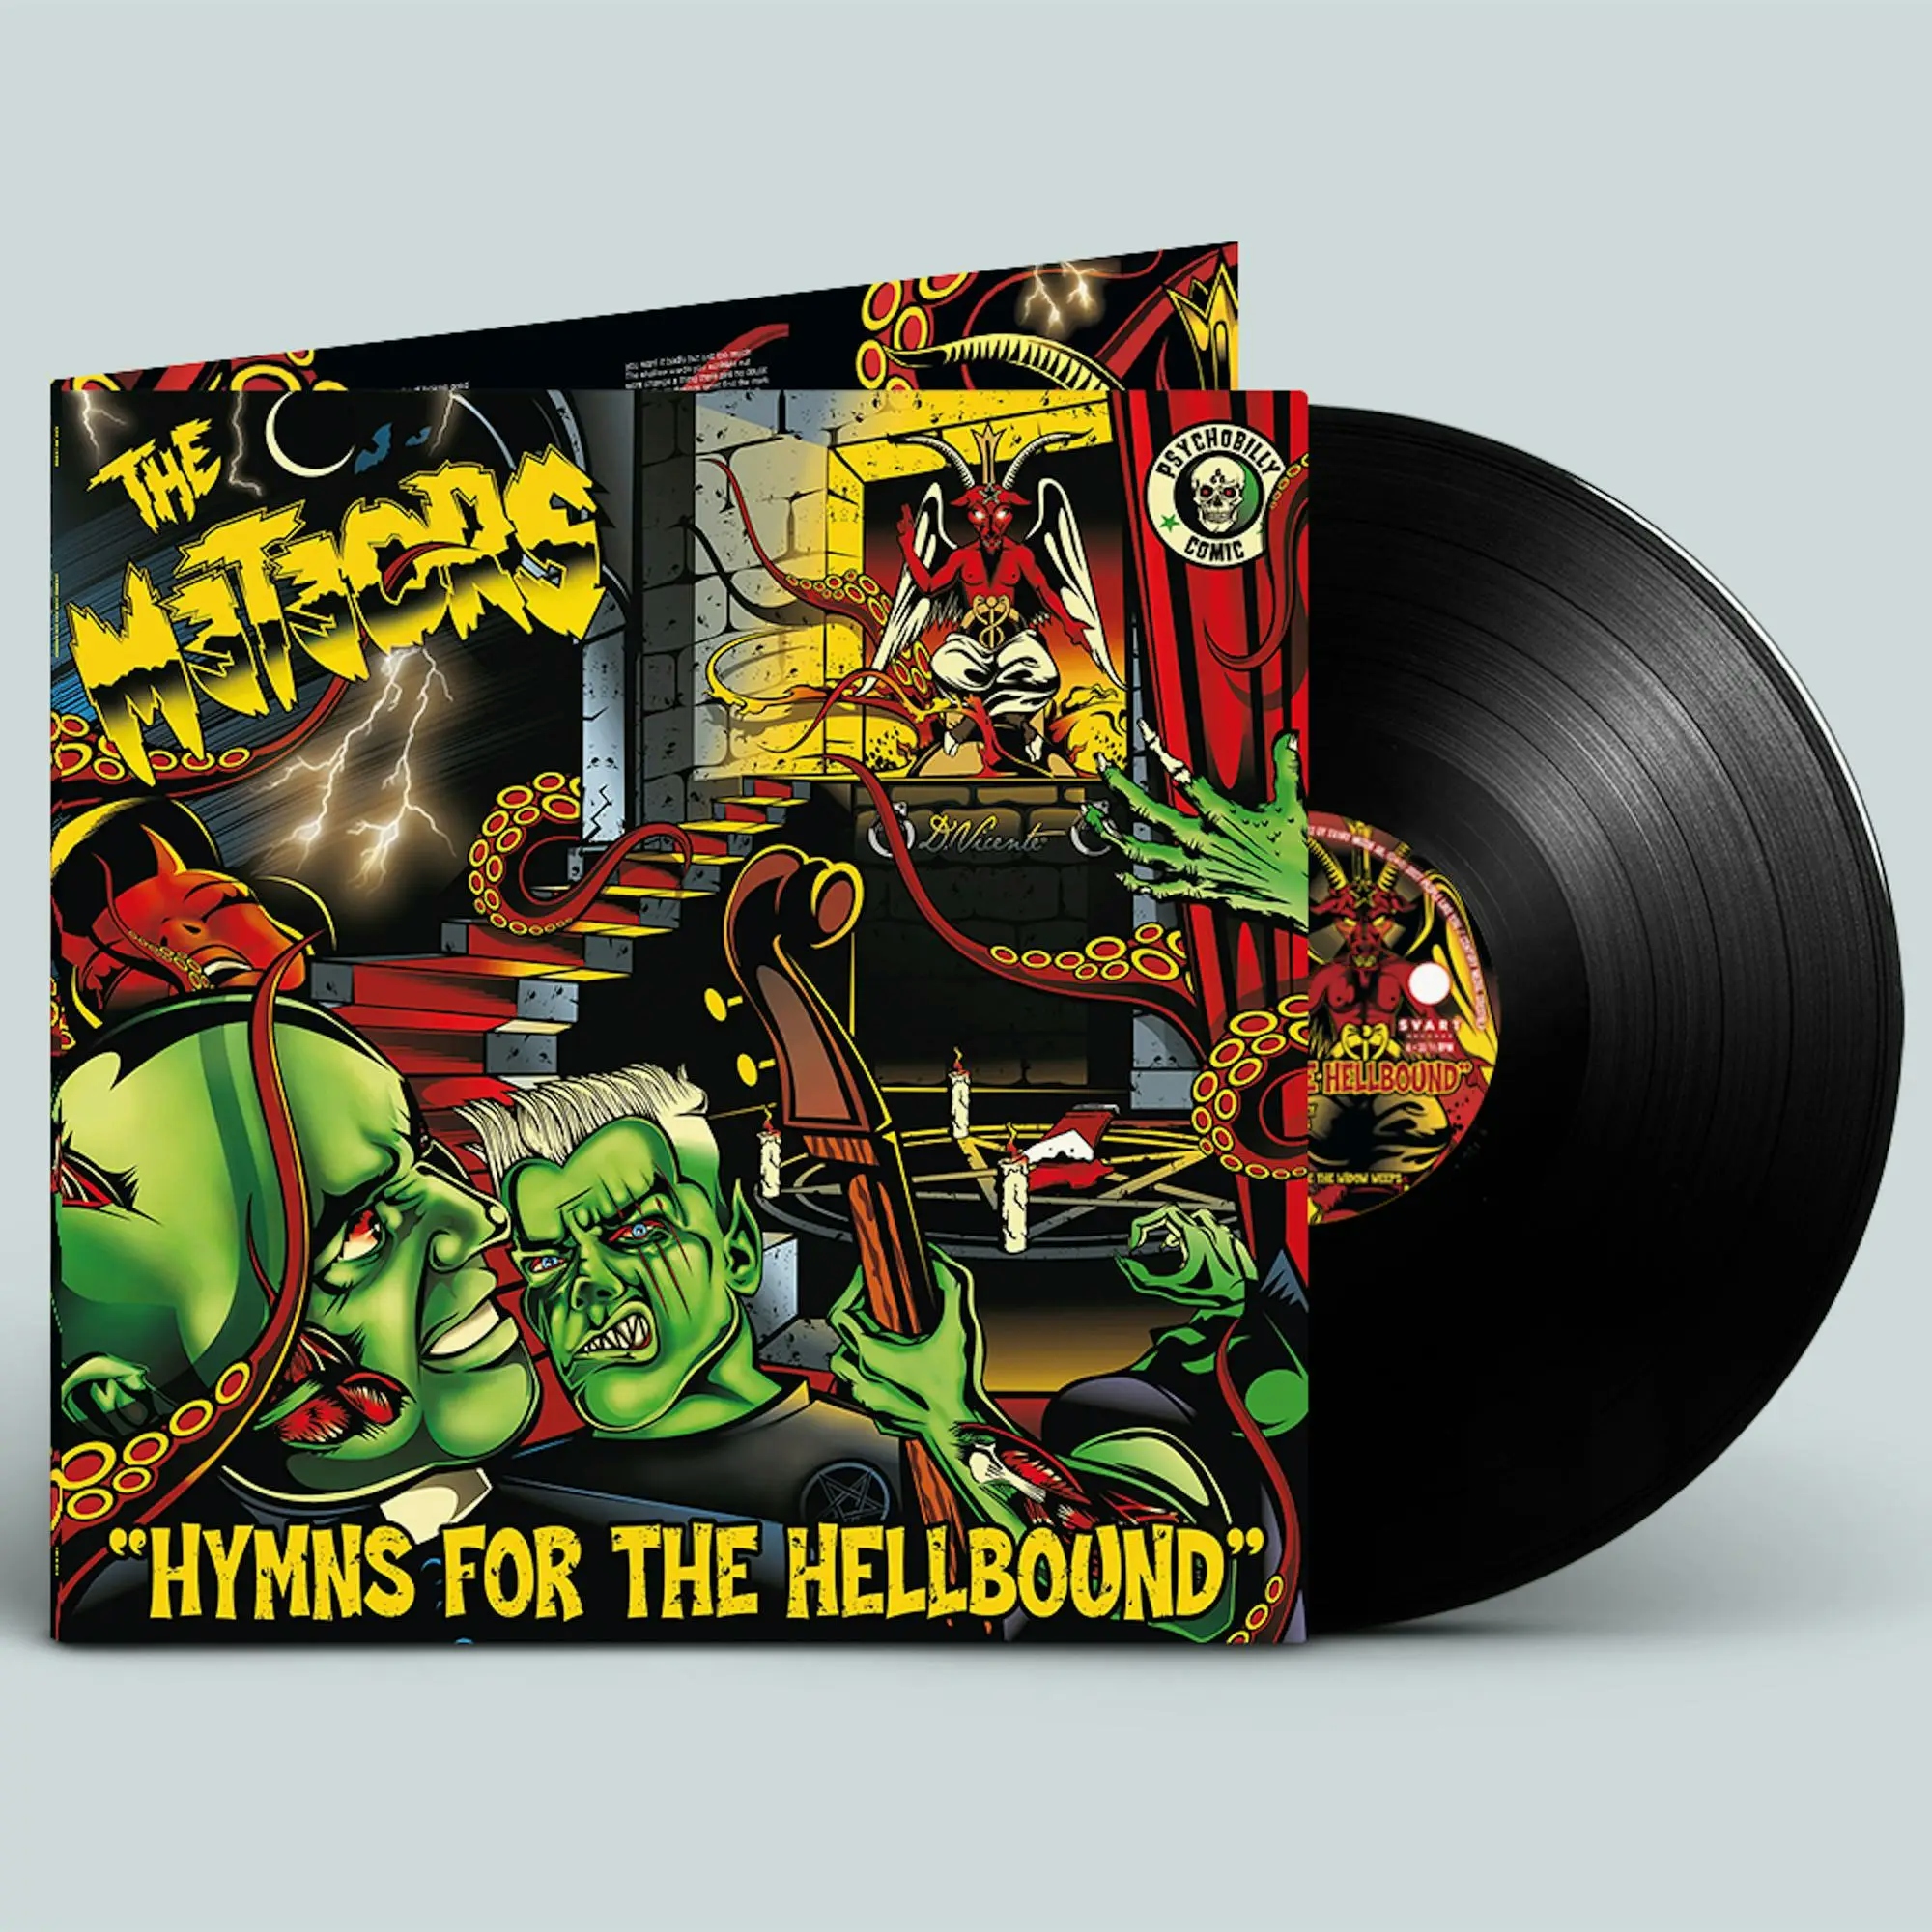 Album artwork for Hymns For The Hellbound by The Meteors